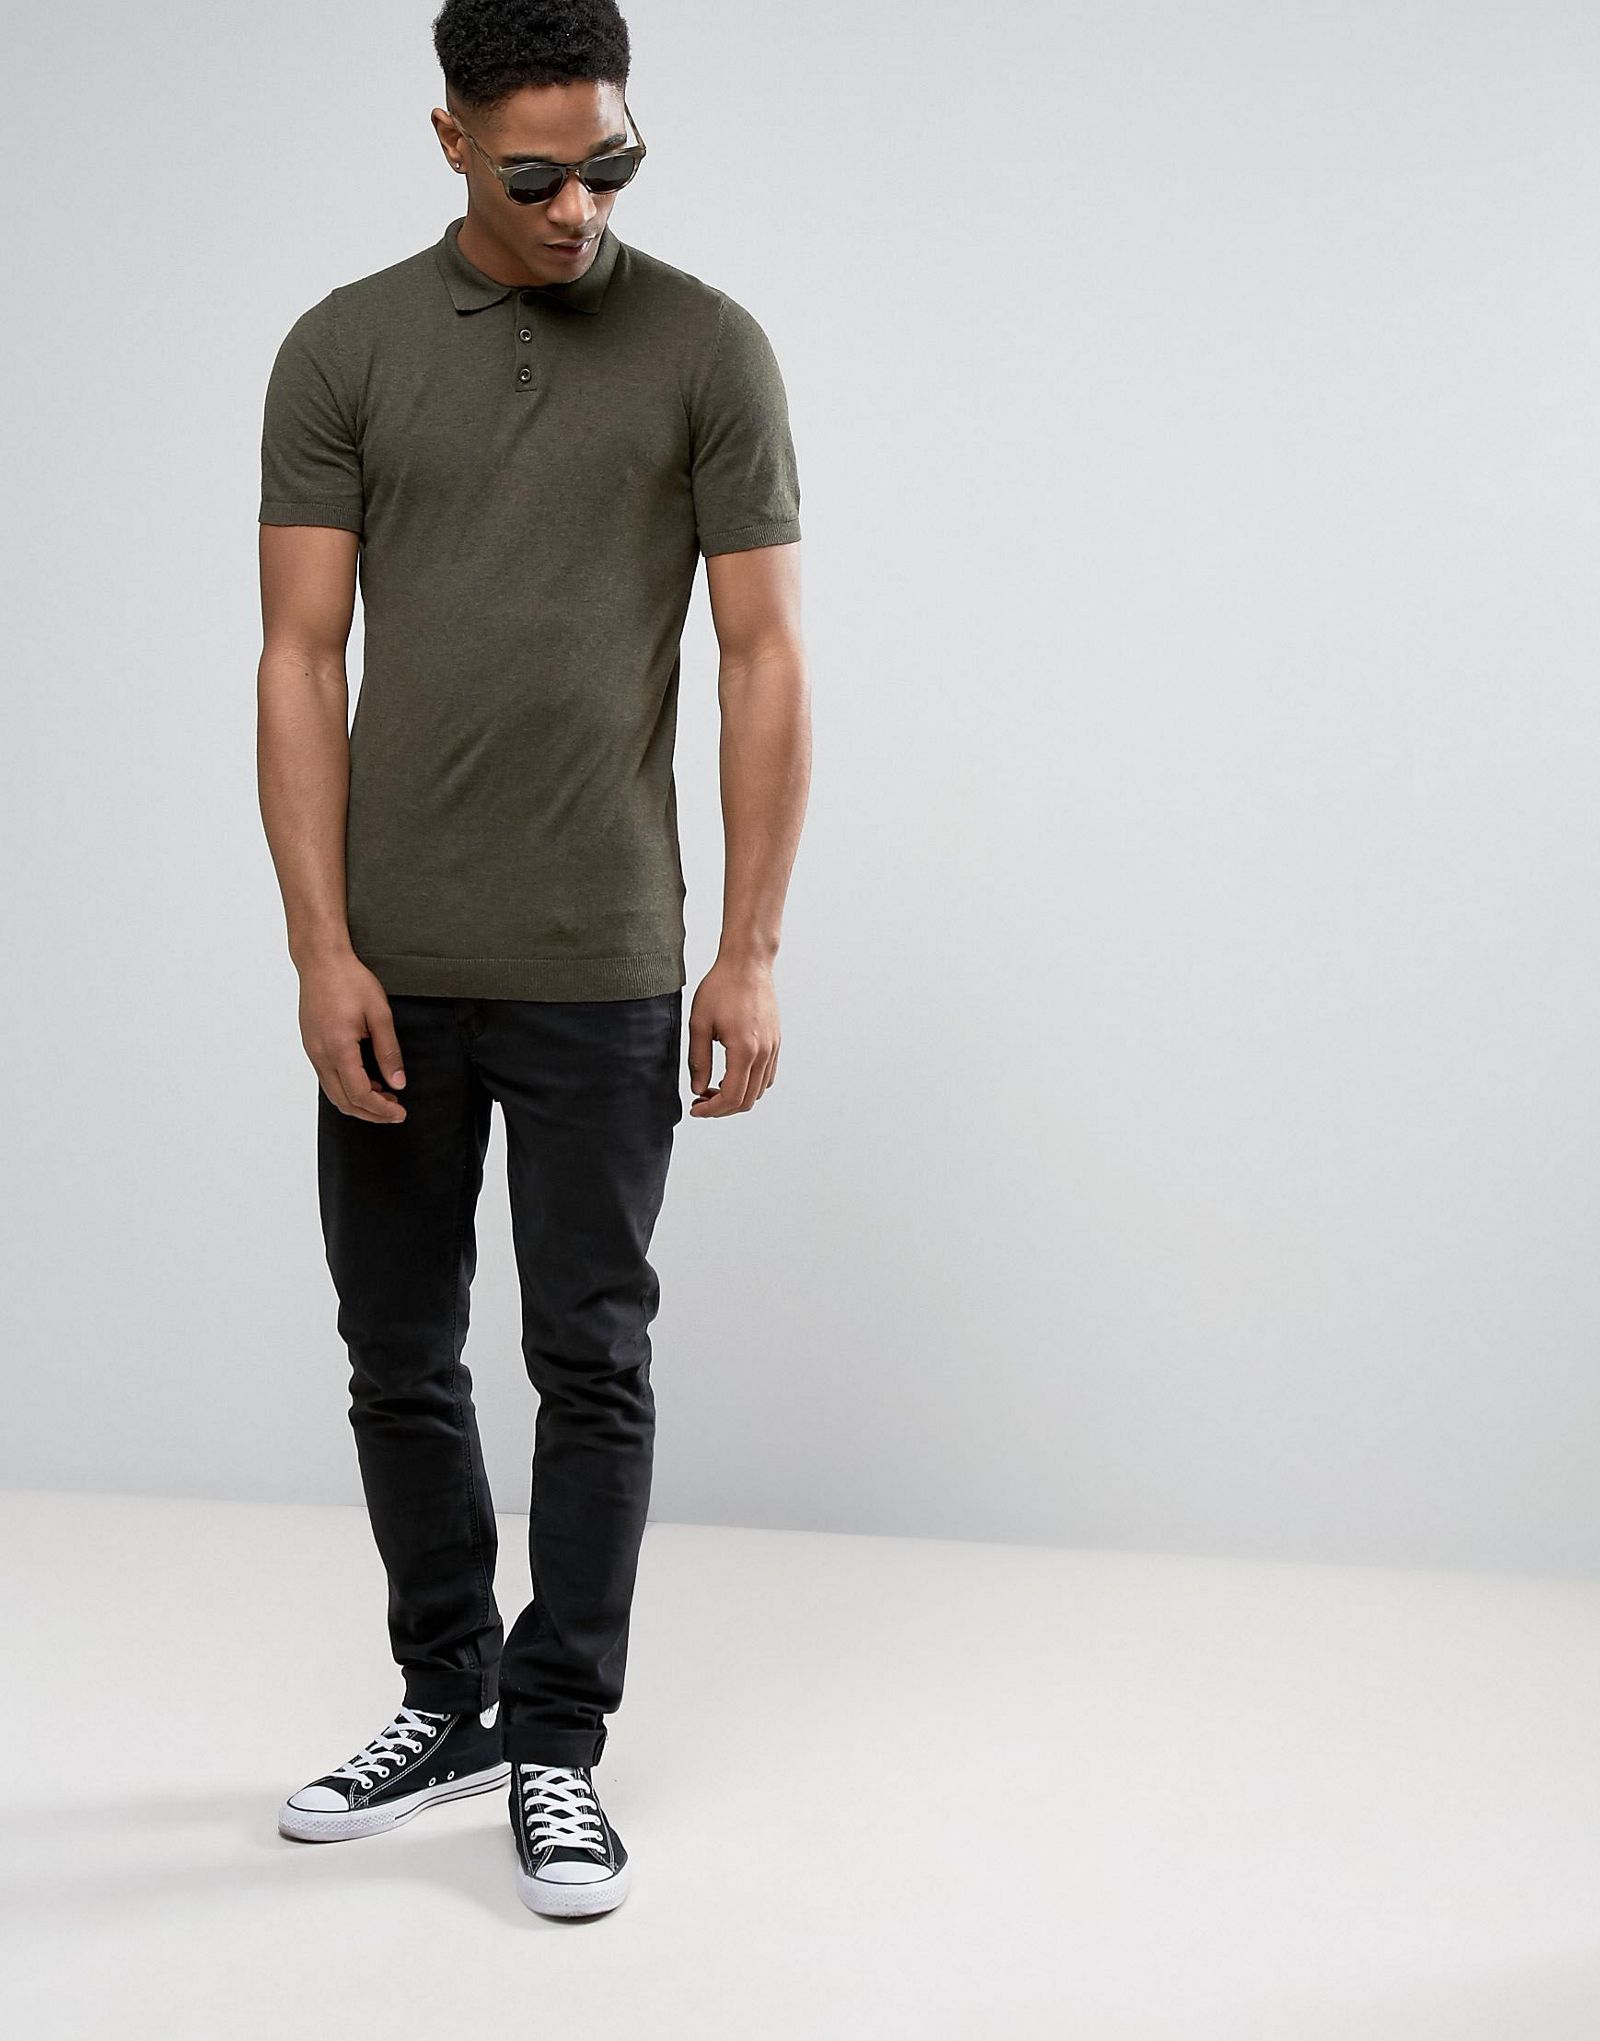 ASOS Muscle Fit Knitted Polo Shirt in Khaki